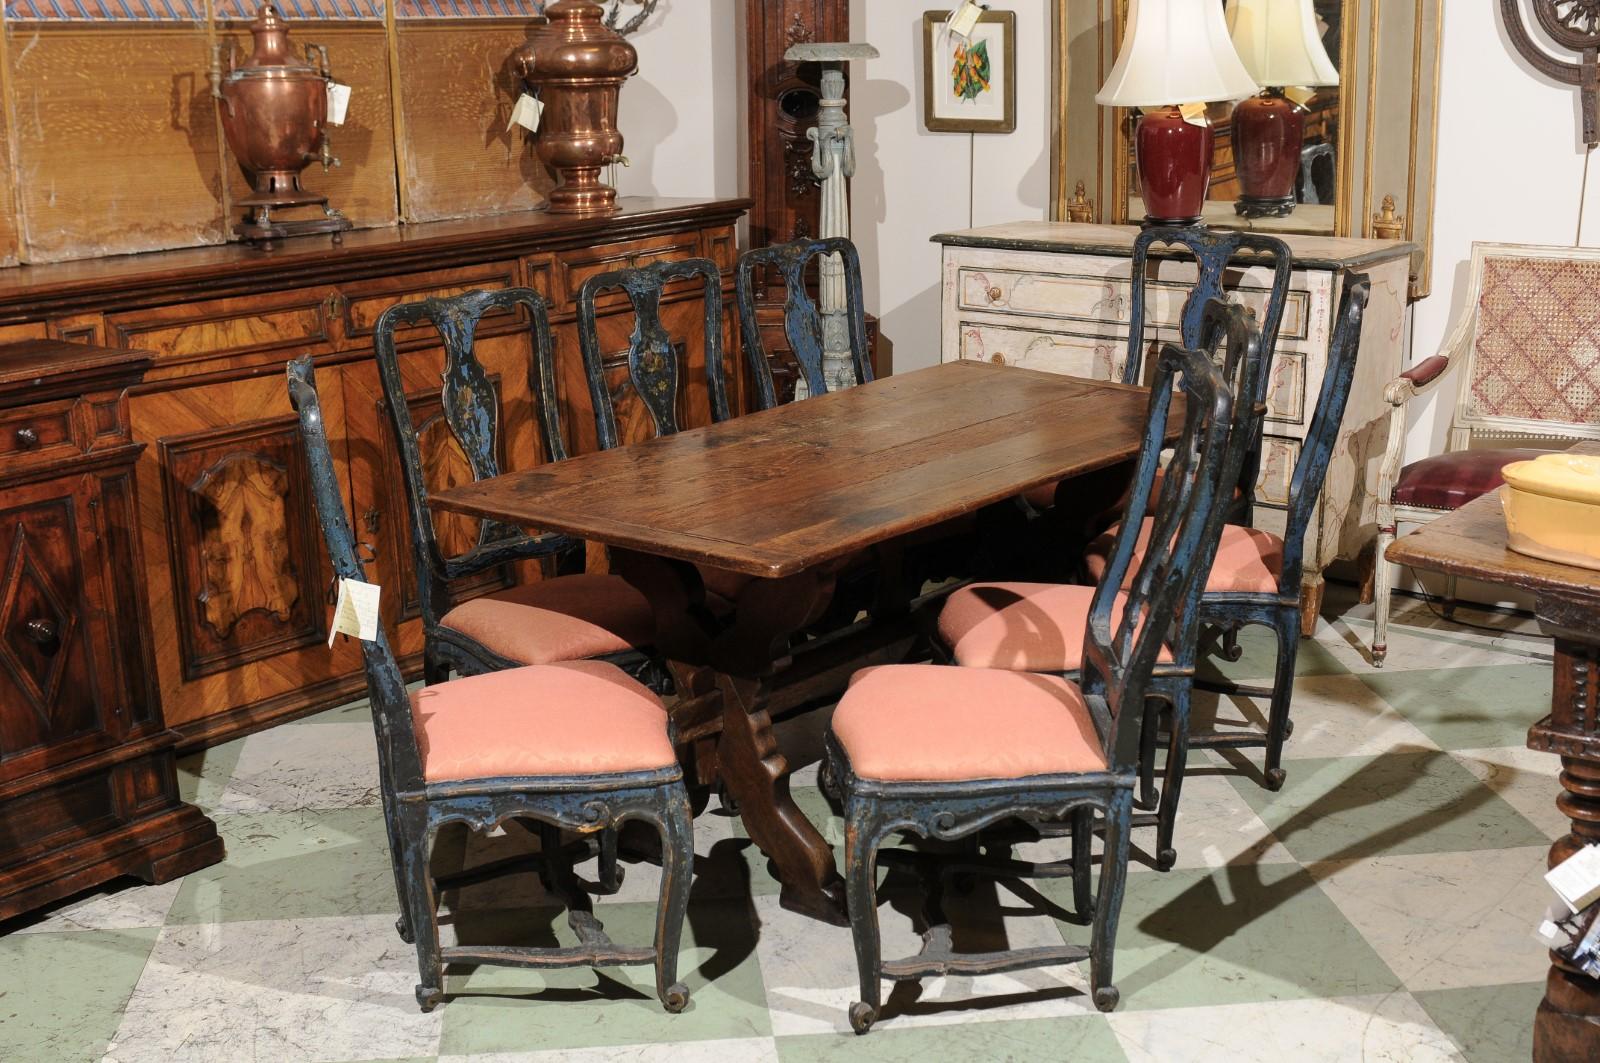 A 19th century Flemish oak trestle dining table with X-leg and stretcher.